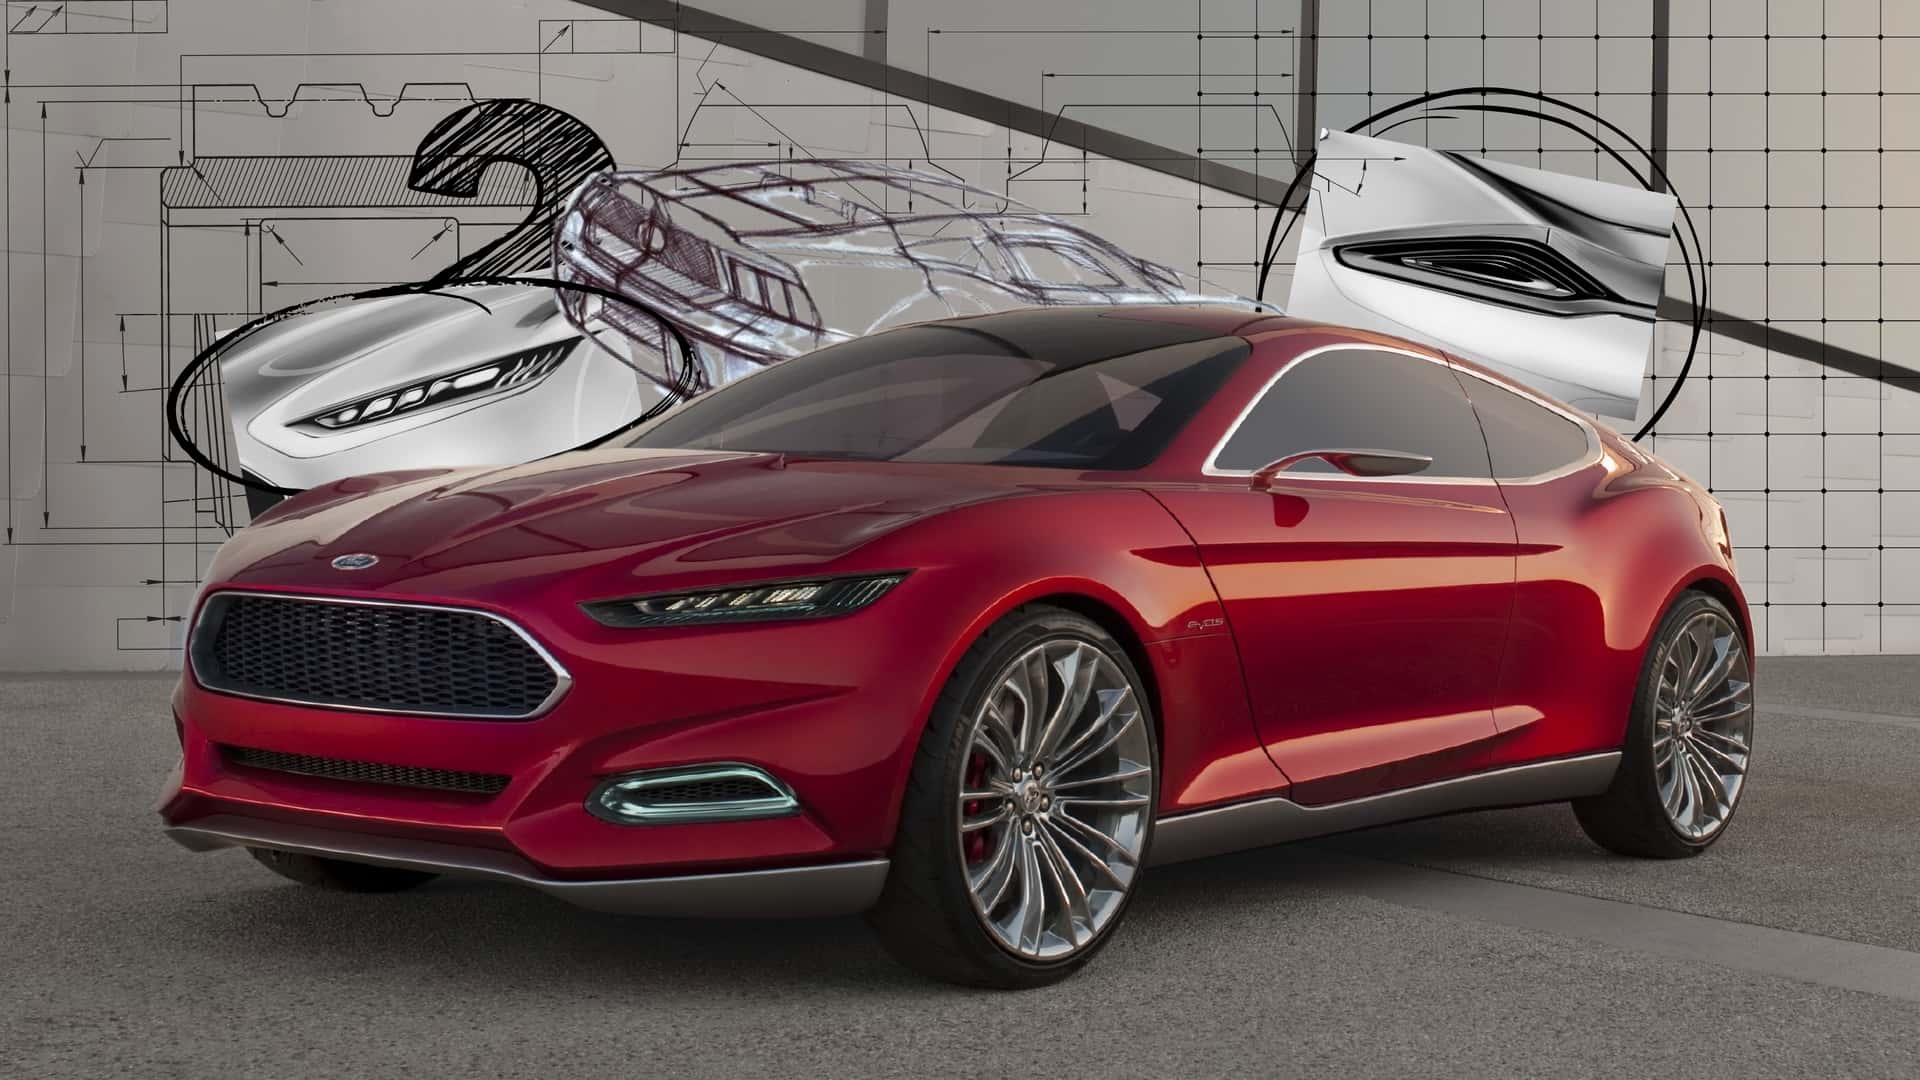 the evos concept inspired an entire generation of fords